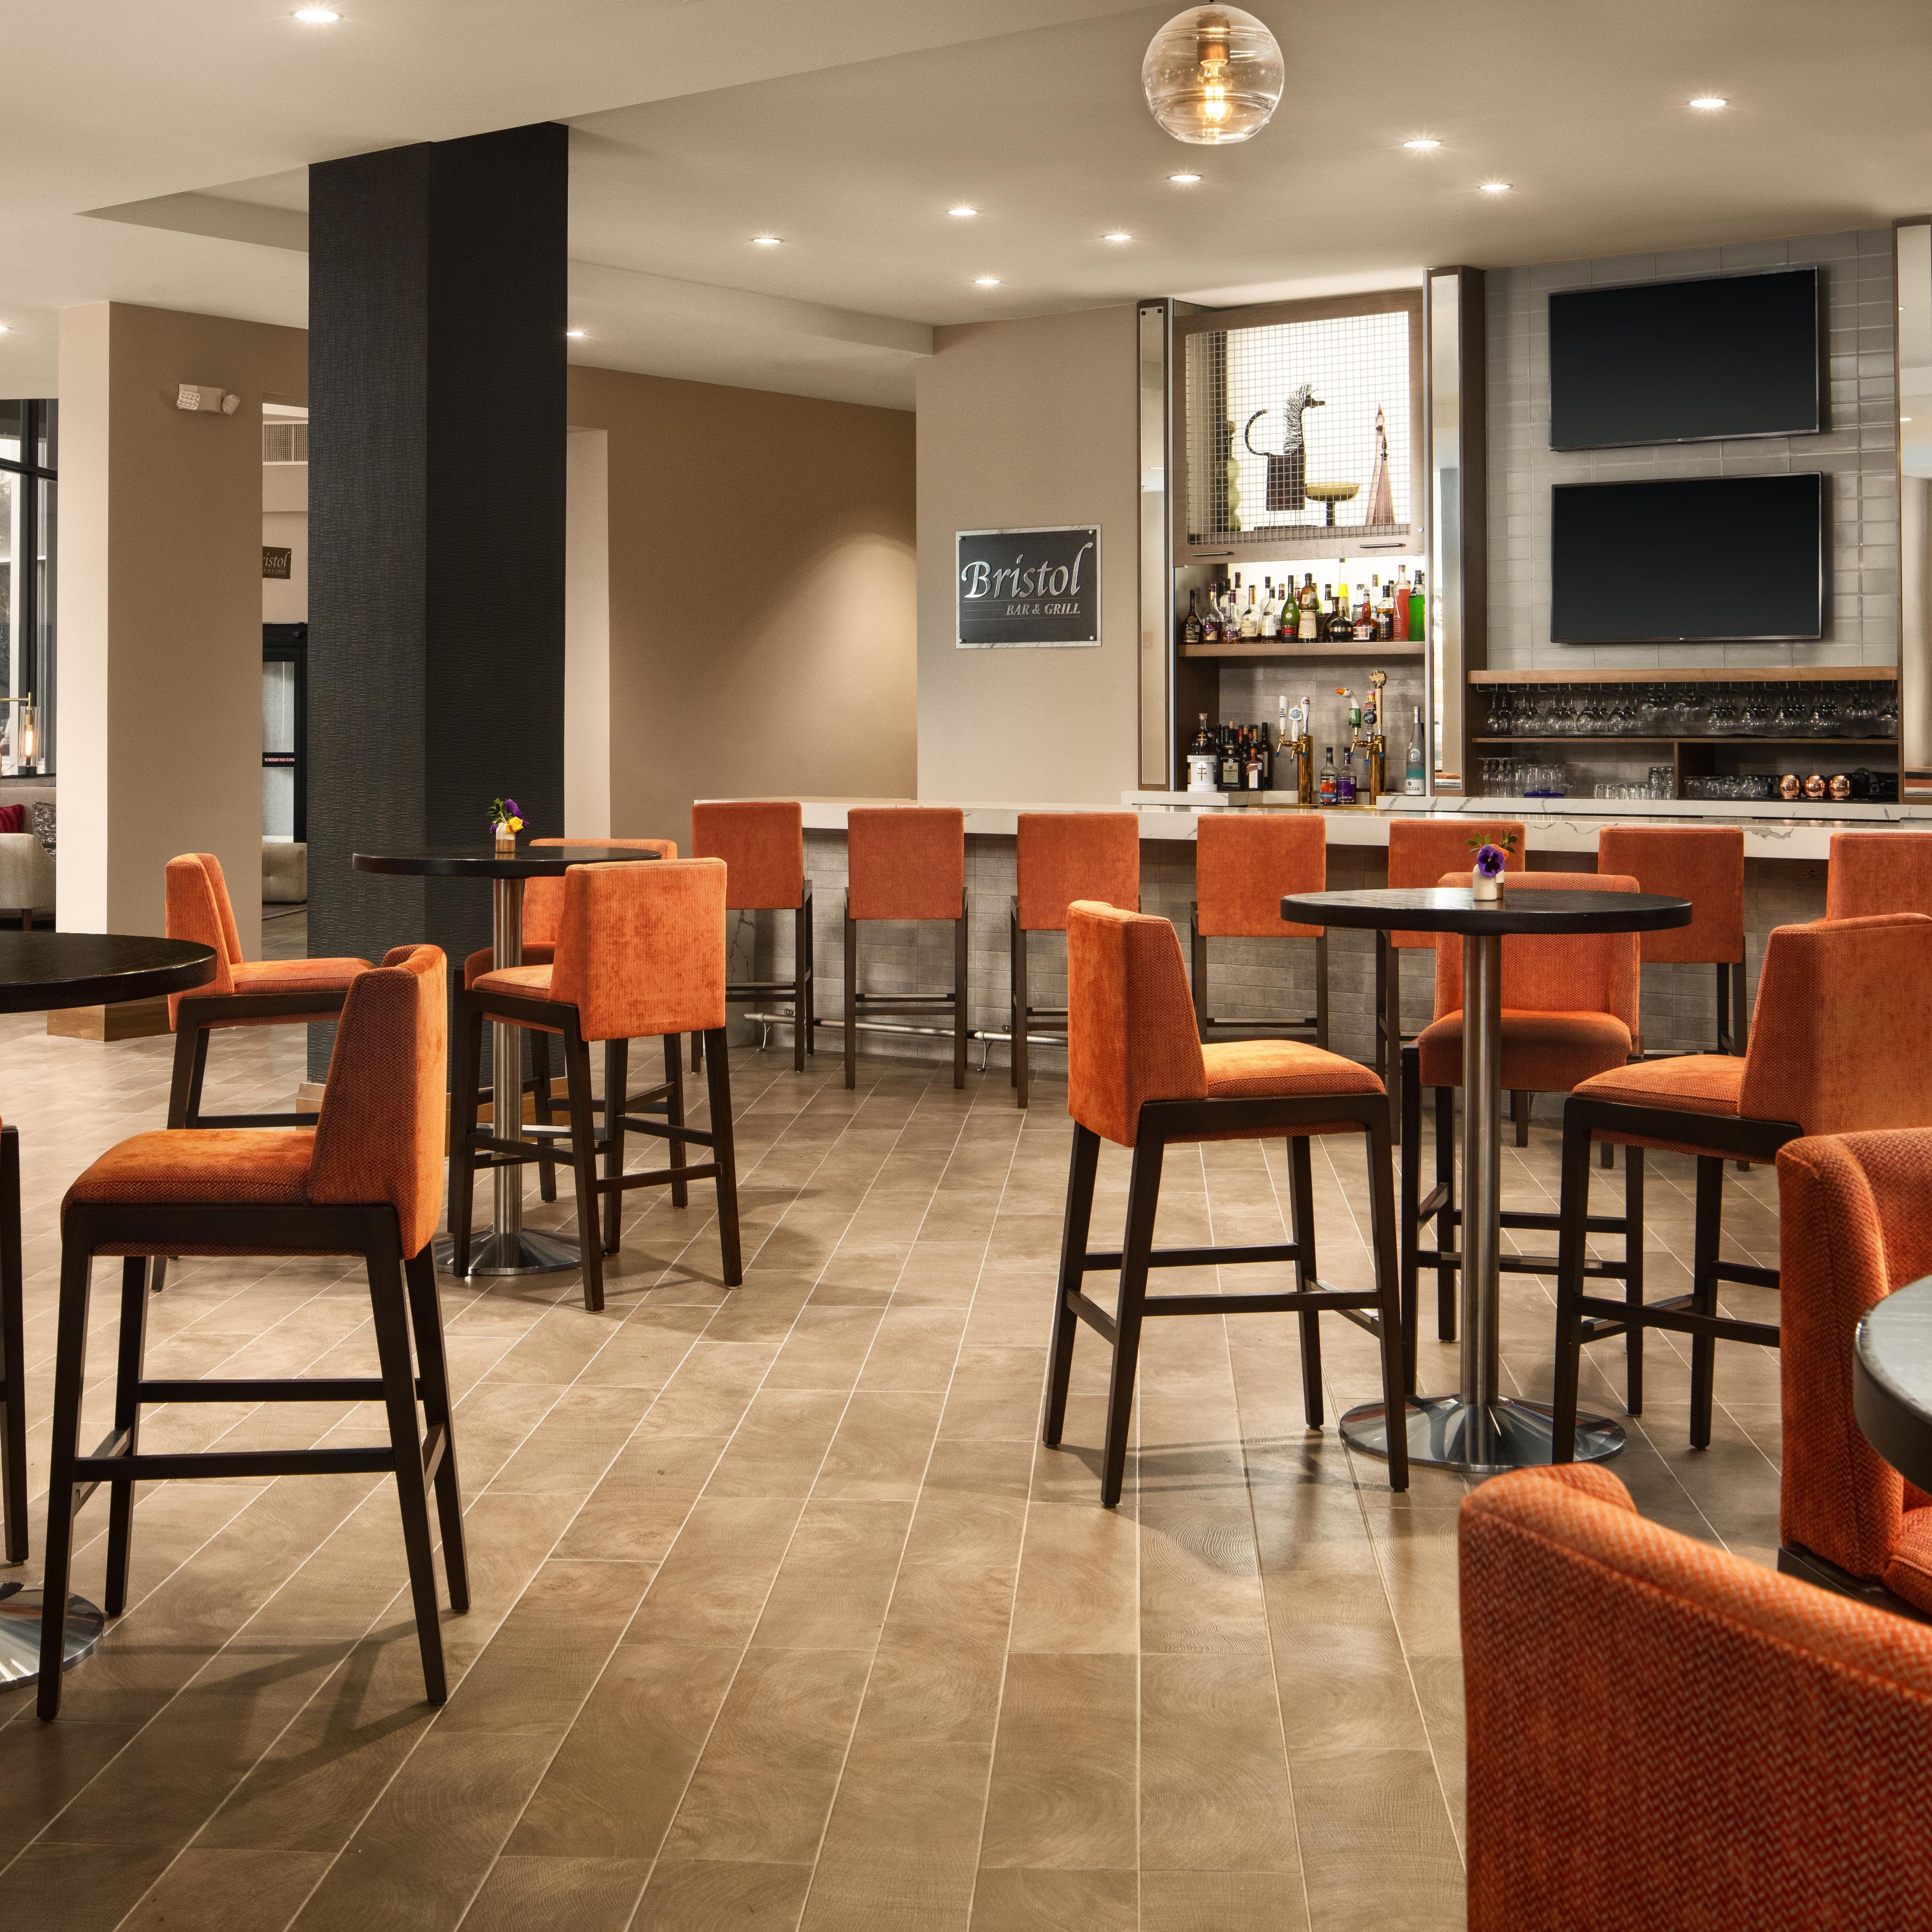 Enjoy specialty drinks and light bites in our bar seating area.